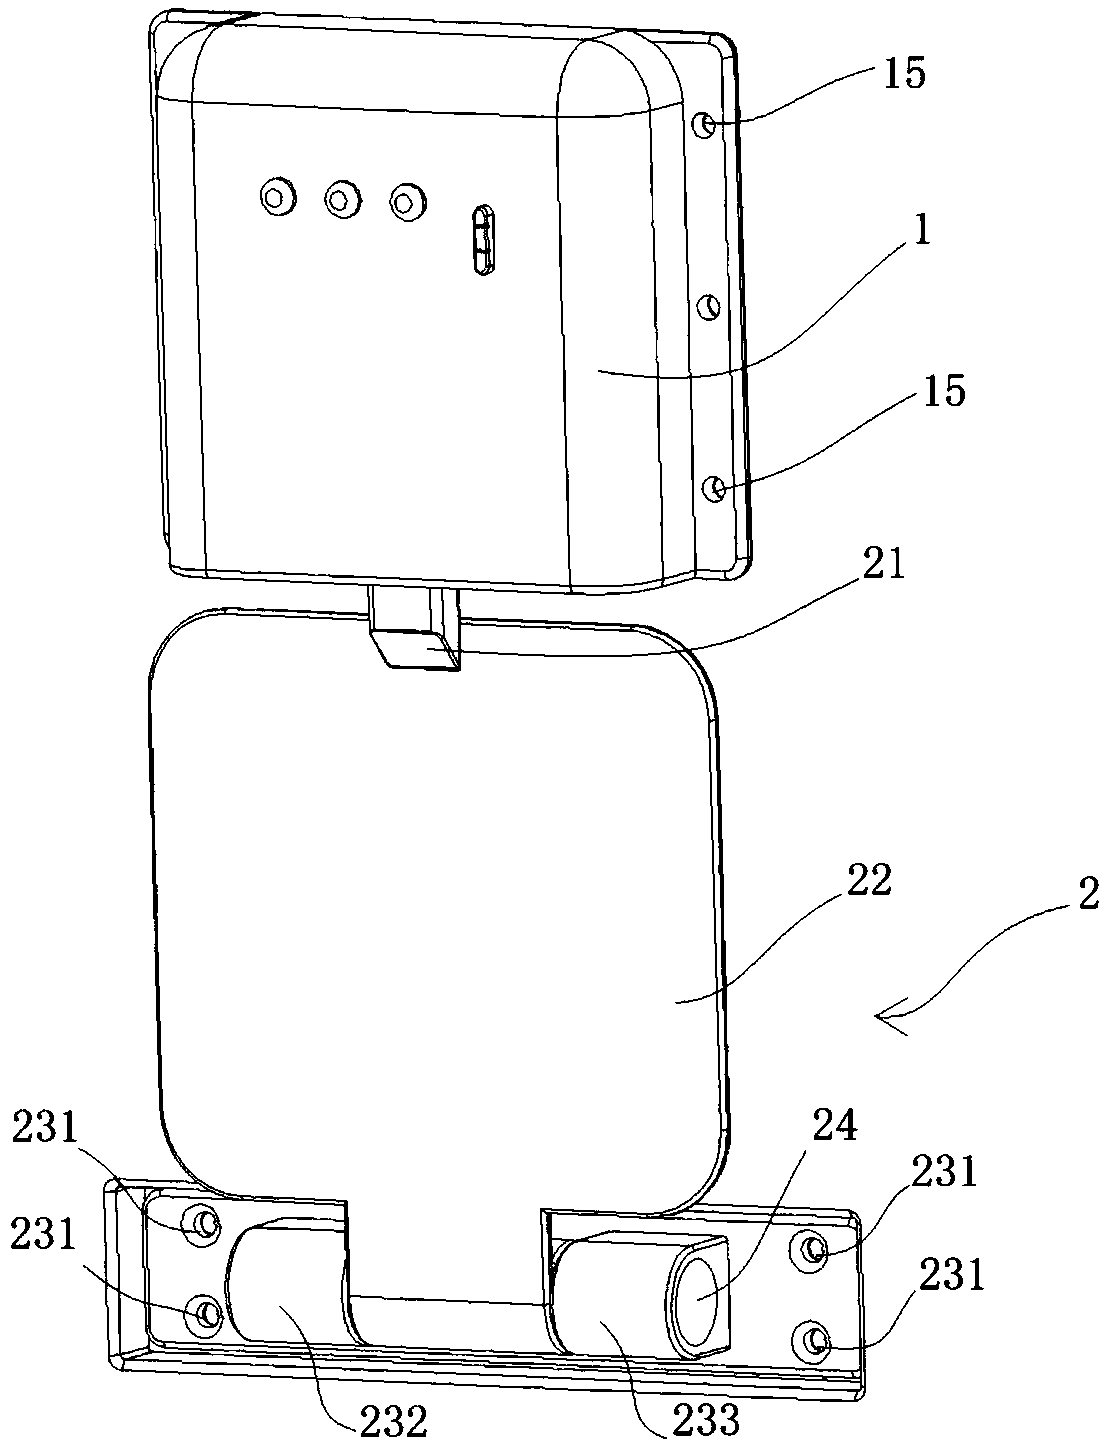 An electromagnetic locking device for a ground knife operation hole of a ring network cabinet